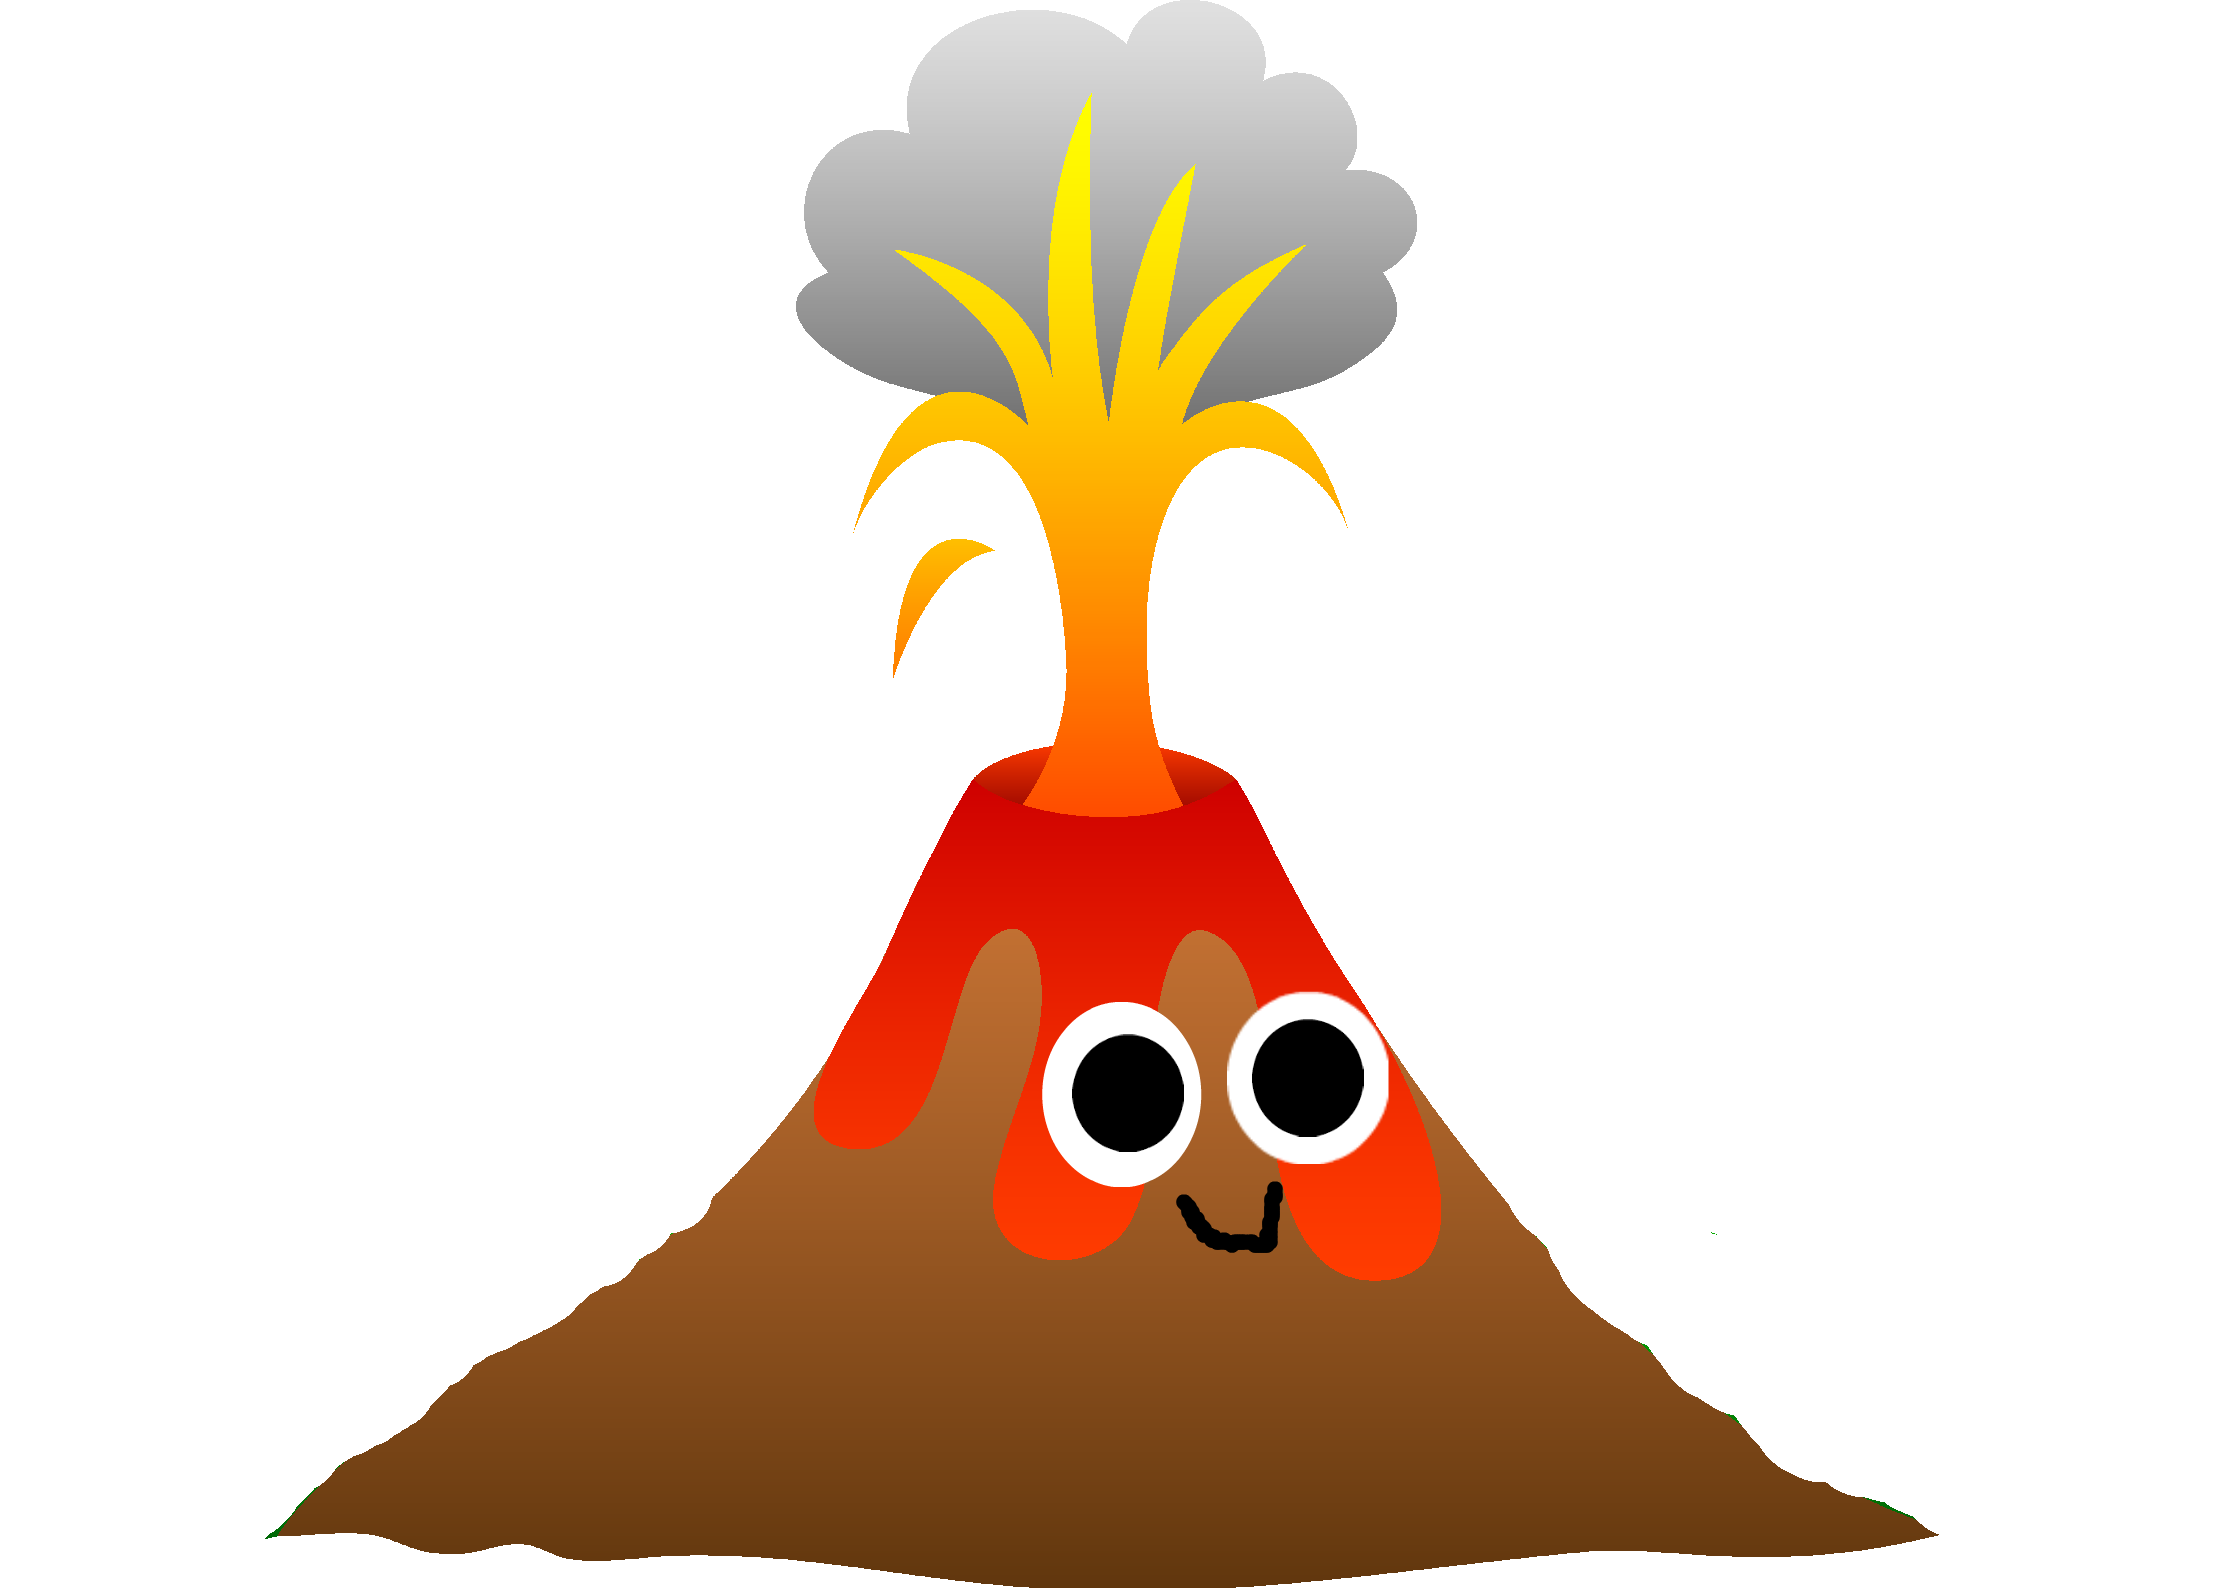 Eruption drawing at getdrawings. Explosion clipart volcano